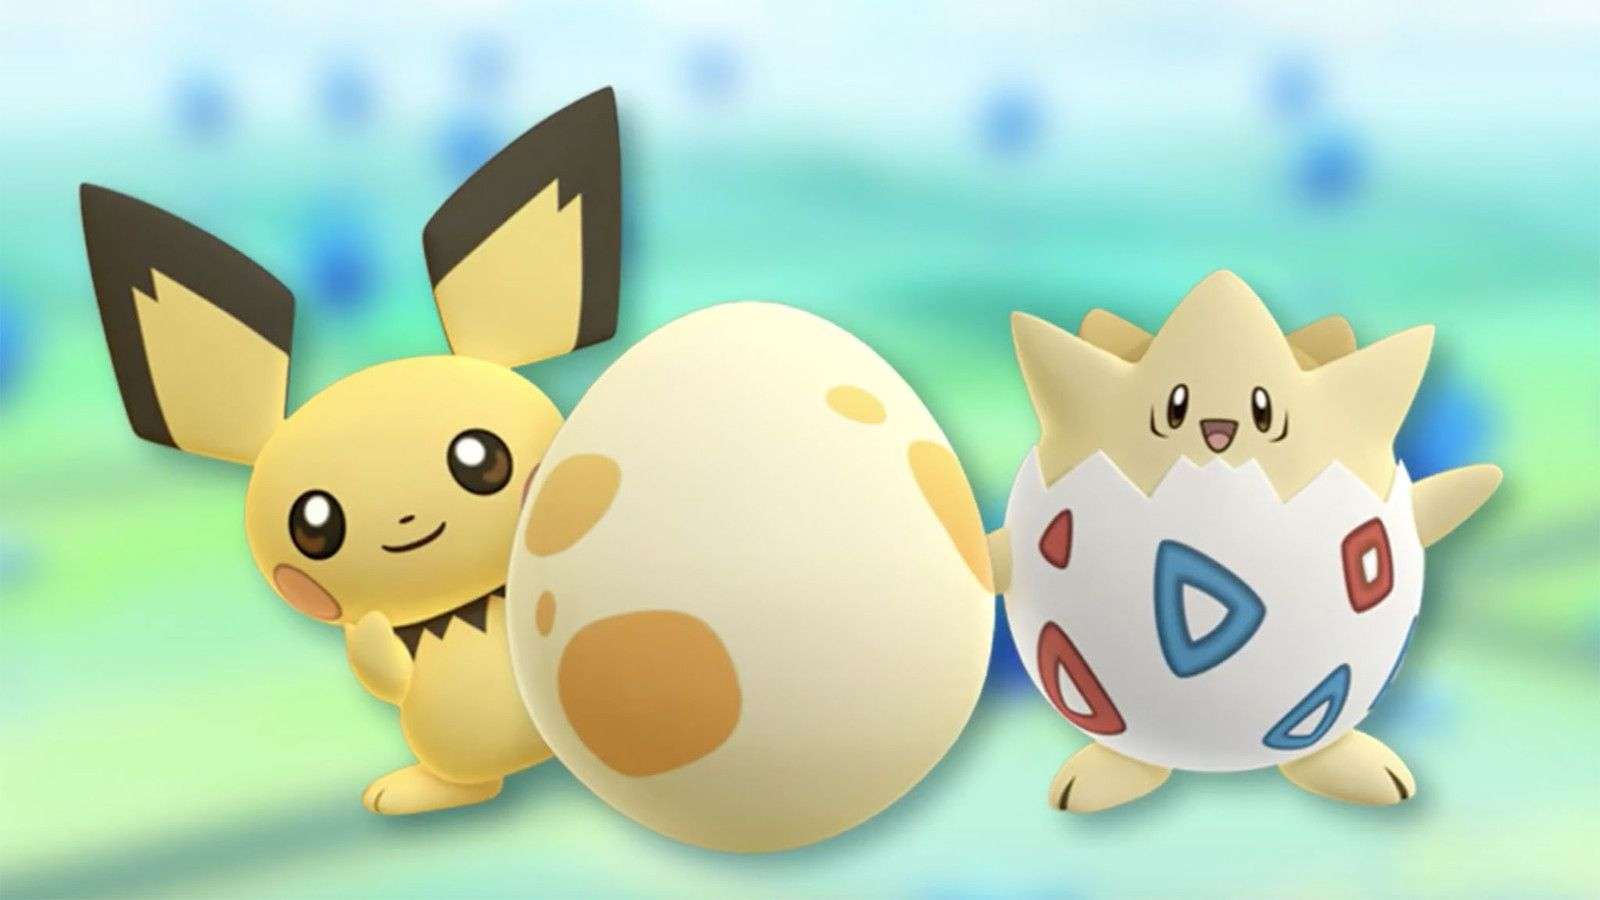 Pokemon Go's Pichu and Togepi holding an egg.